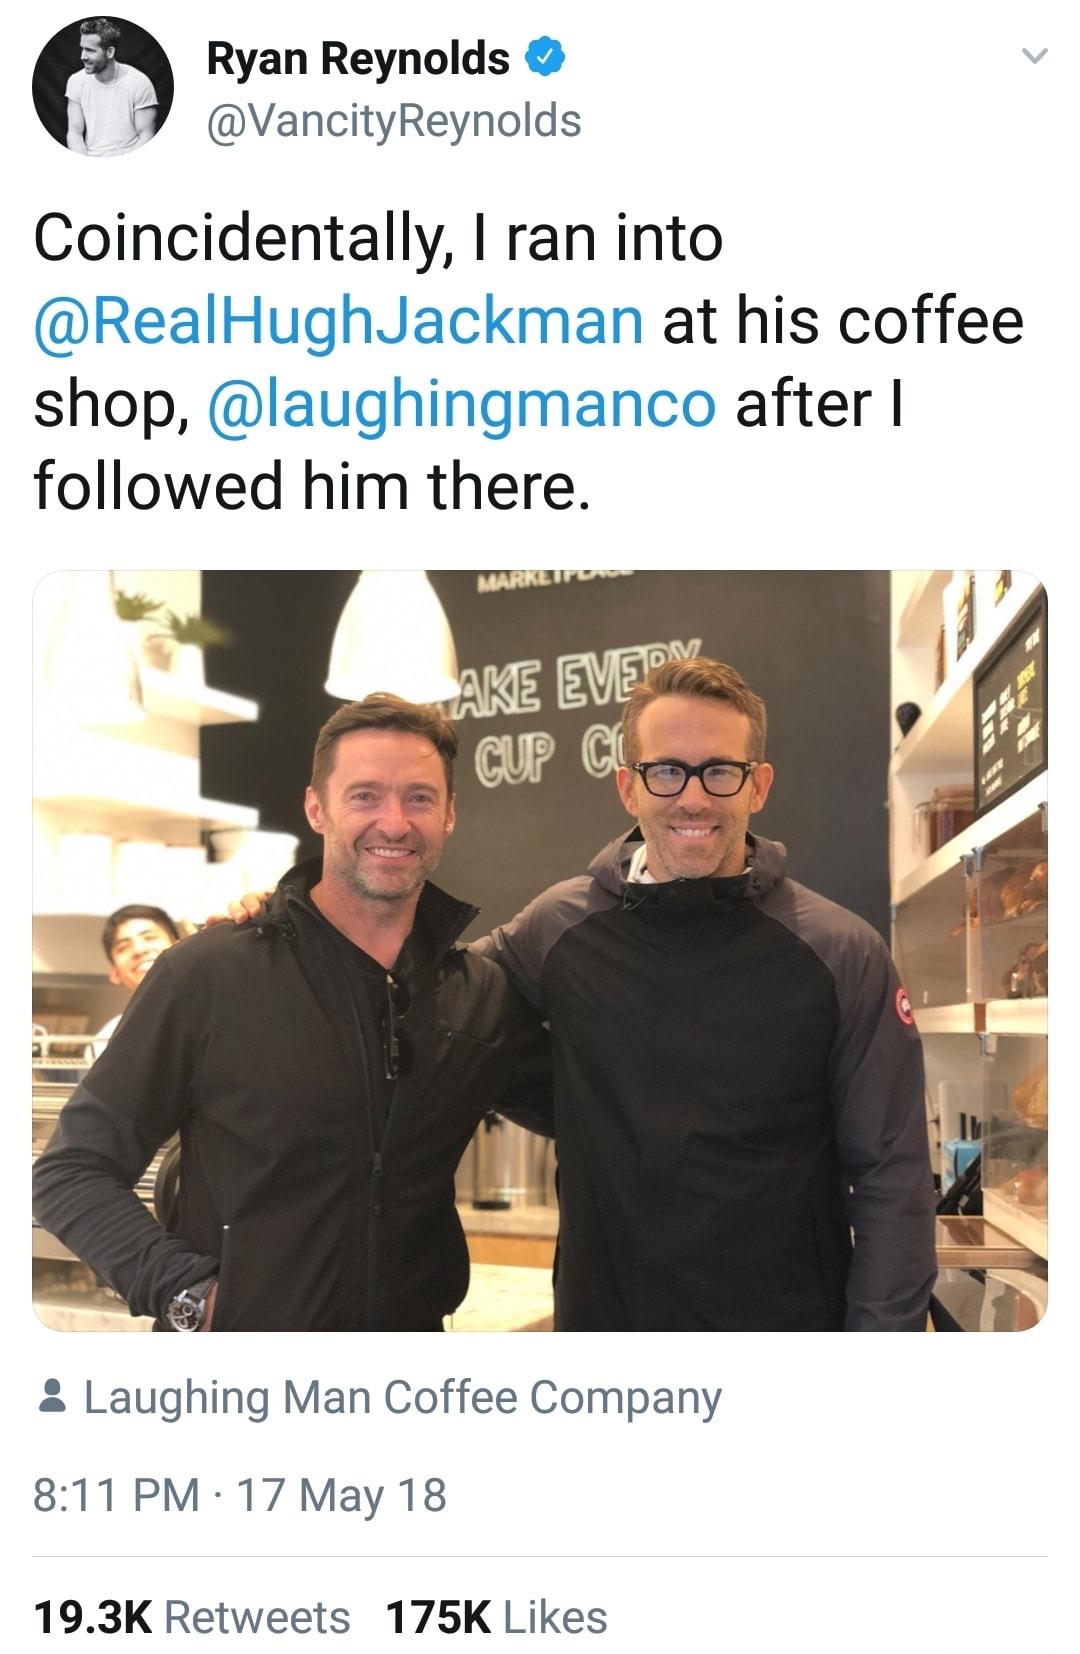 memes - jake gyllenhaal ryan reynolds hugh jackman - Ryan Reynolds Coincidentally, I ran into at his coffee shop, after | ed him there. Mar Ake Evedy Cup Coo Laughing Man Coffee Company 17 May 18